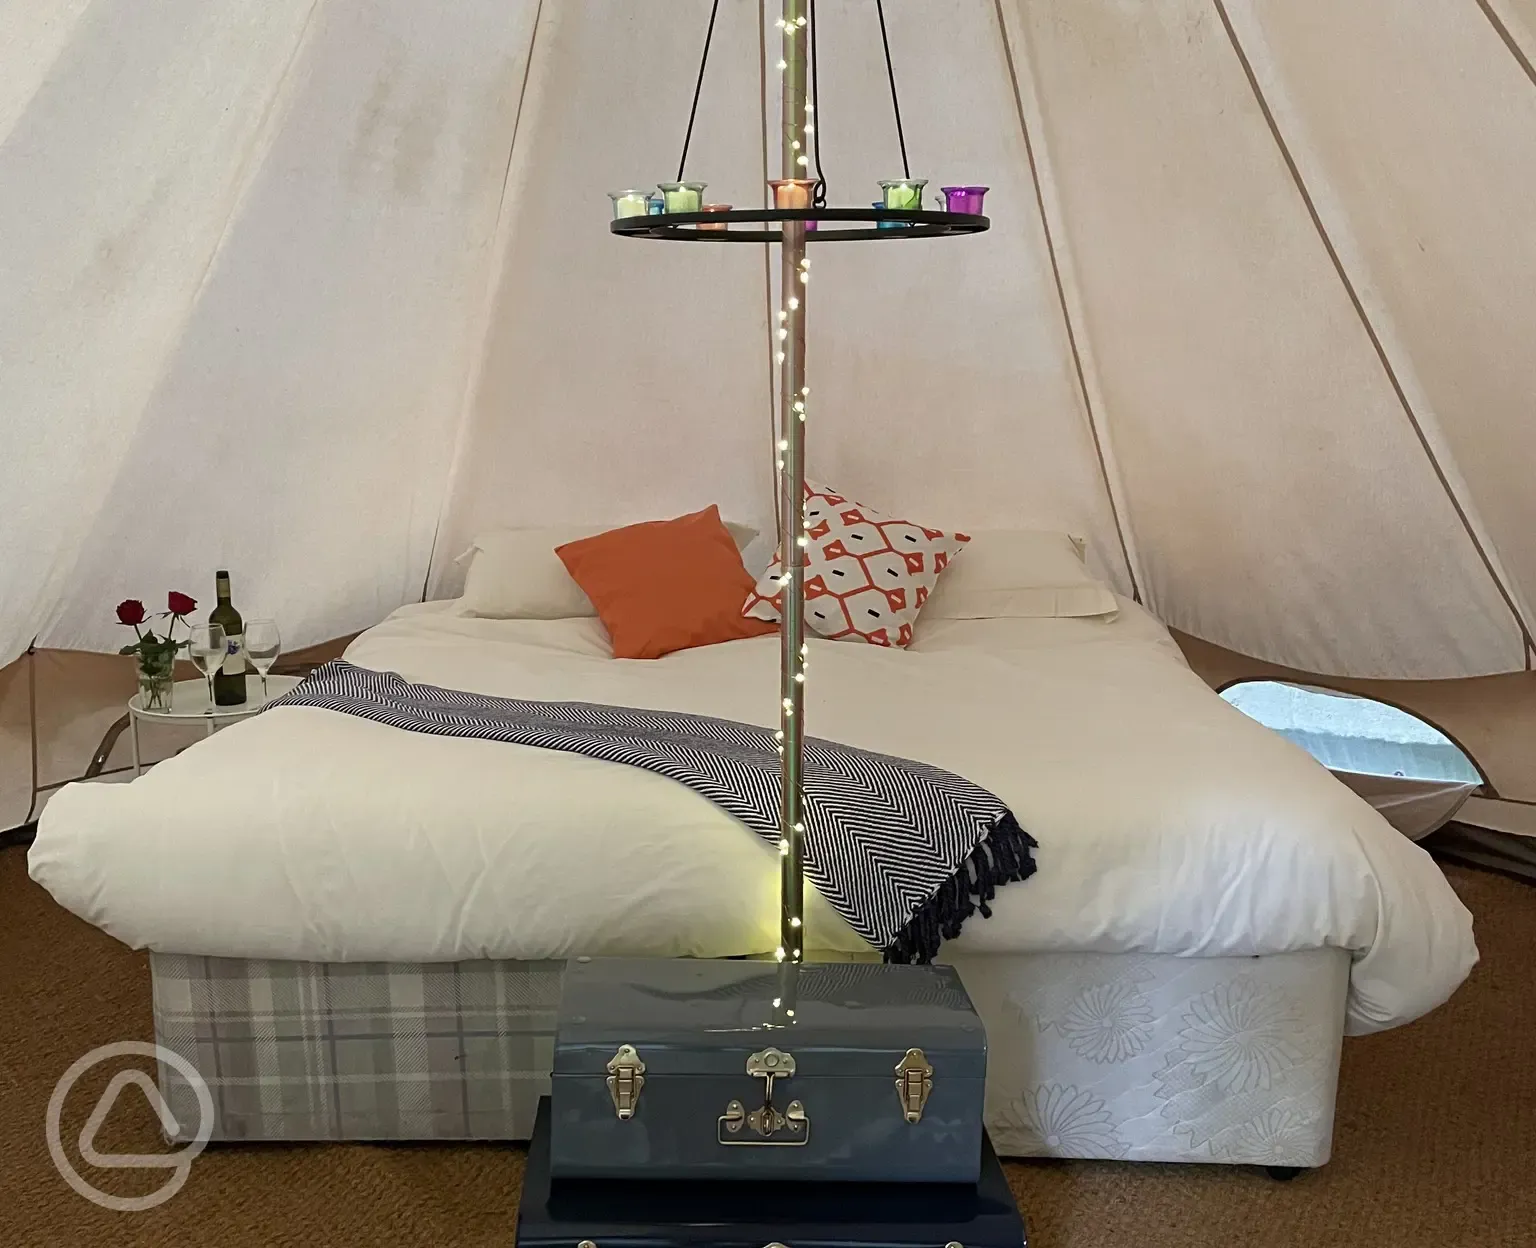 Inside the bell tent 